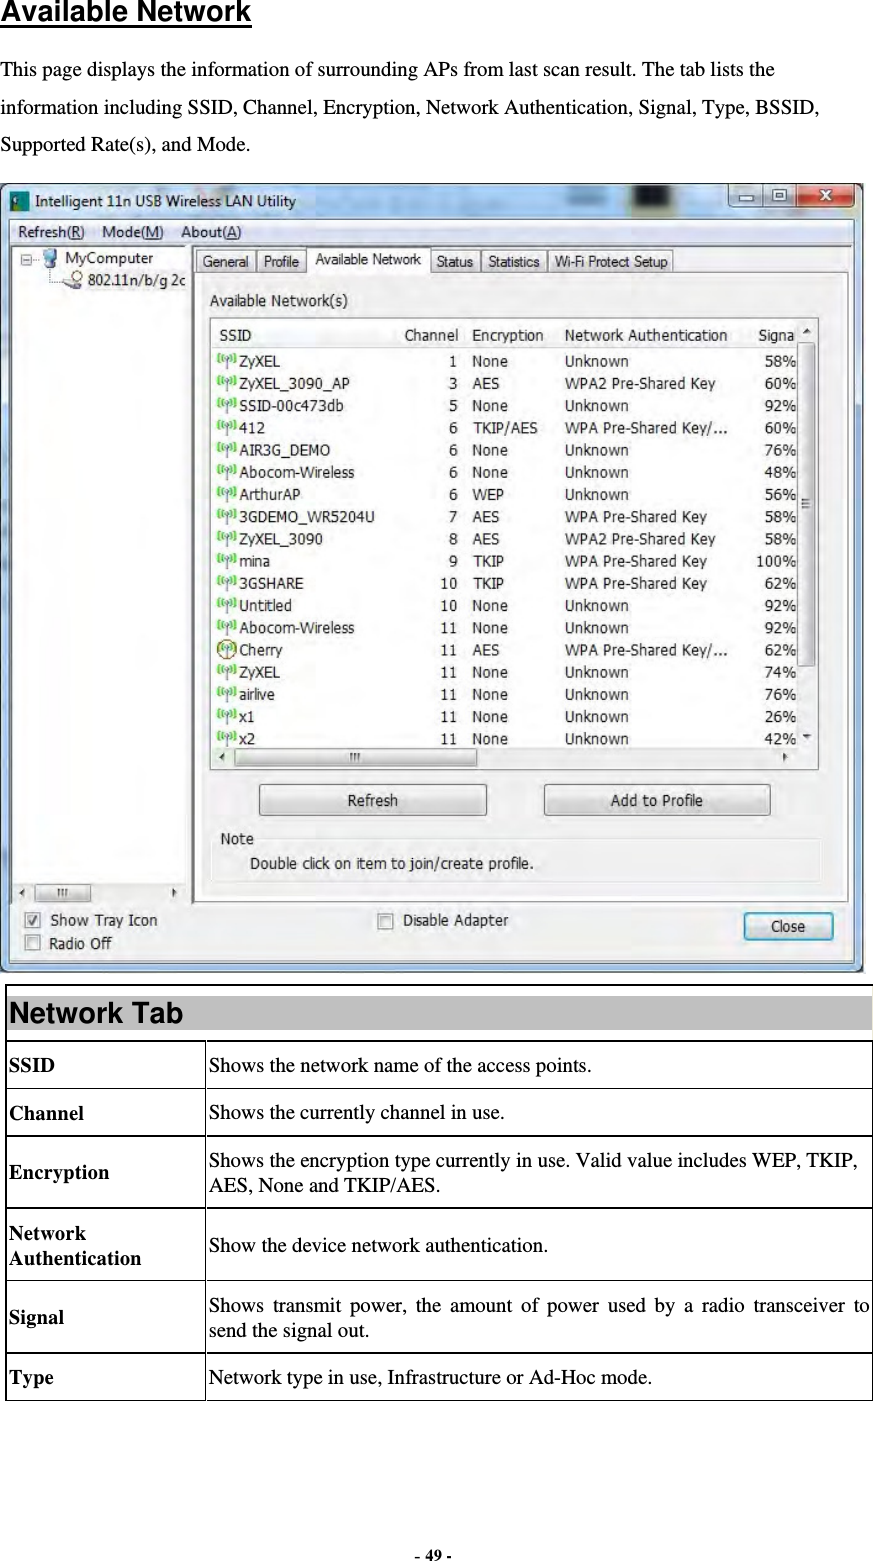  - 49 - Available Network This page displays the information of surrounding APs from last scan result. The tab lists the information including SSID, Channel, Encryption, Network Authentication, Signal, Type, BSSID, Supported Rate(s), and Mode.  Network Tab SSID  Shows the network name of the access points. Channel  Shows the currently channel in use. Encryption  Shows the encryption type currently in use. Valid value includes WEP, TKIP, AES, None and TKIP/AES. Network Authentication  Show the device network authentication. Signal  Shows transmit power, the amount of power used by a radio transceiver to send the signal out. Type Network type in use, Infrastructure or Ad-Hoc mode. 